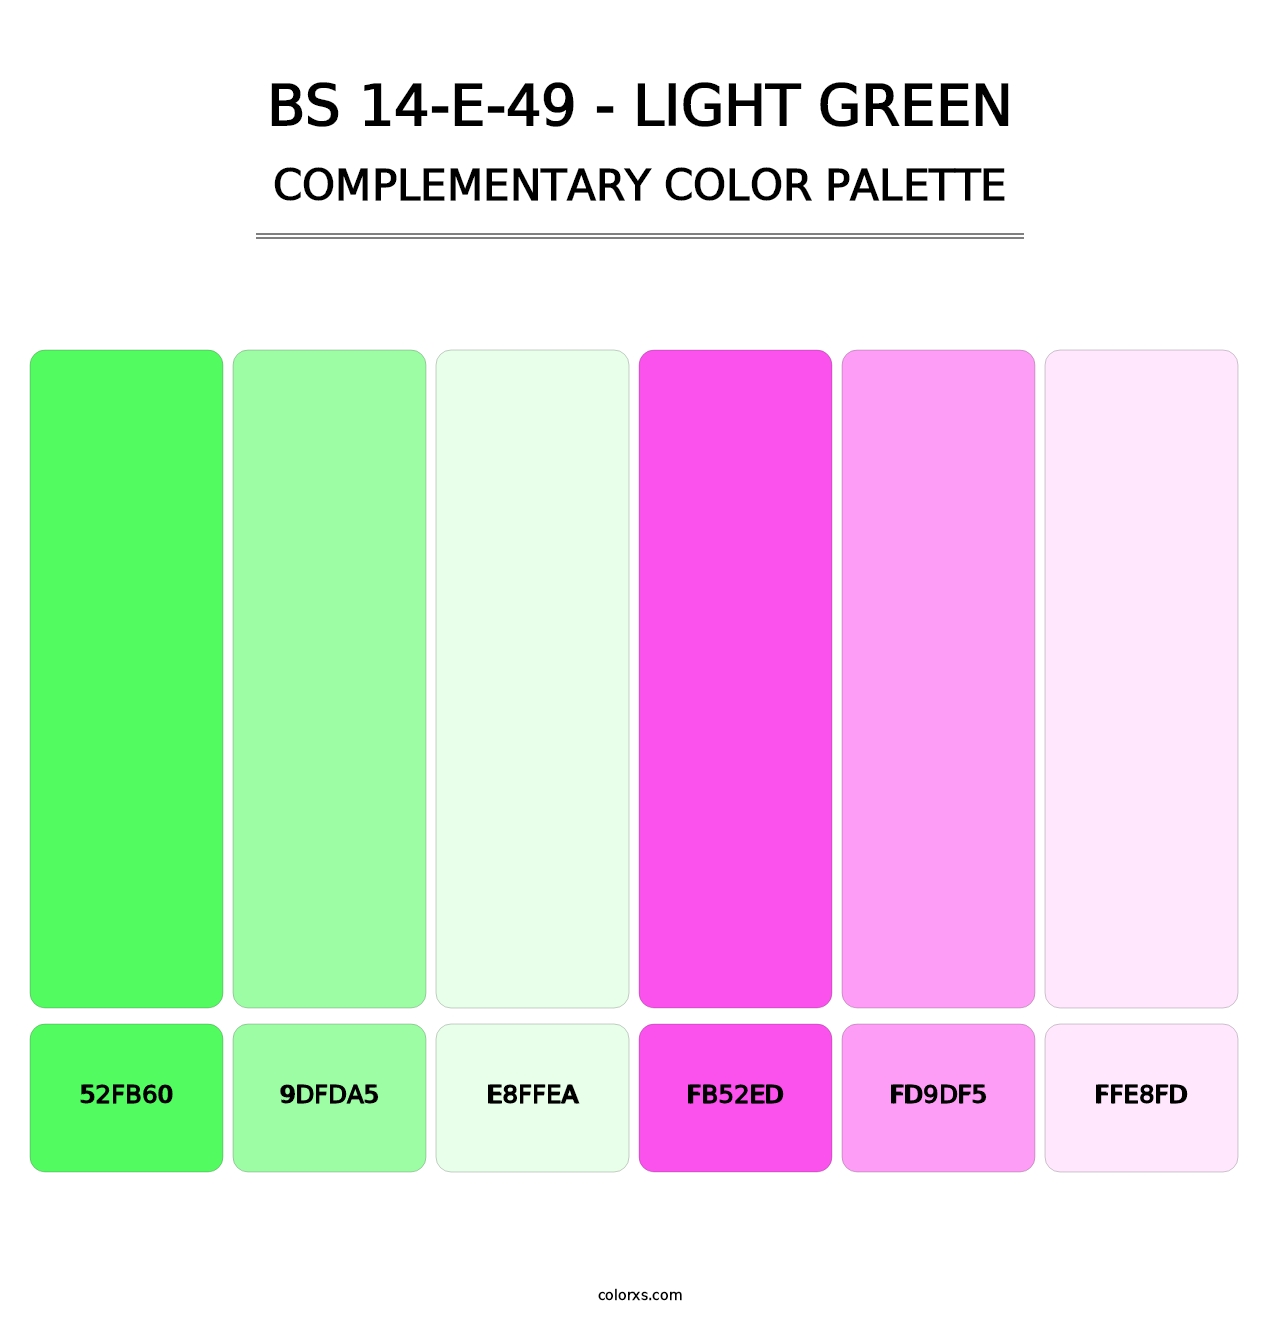 BS 14-E-49 - Light Green - Complementary Color Palette